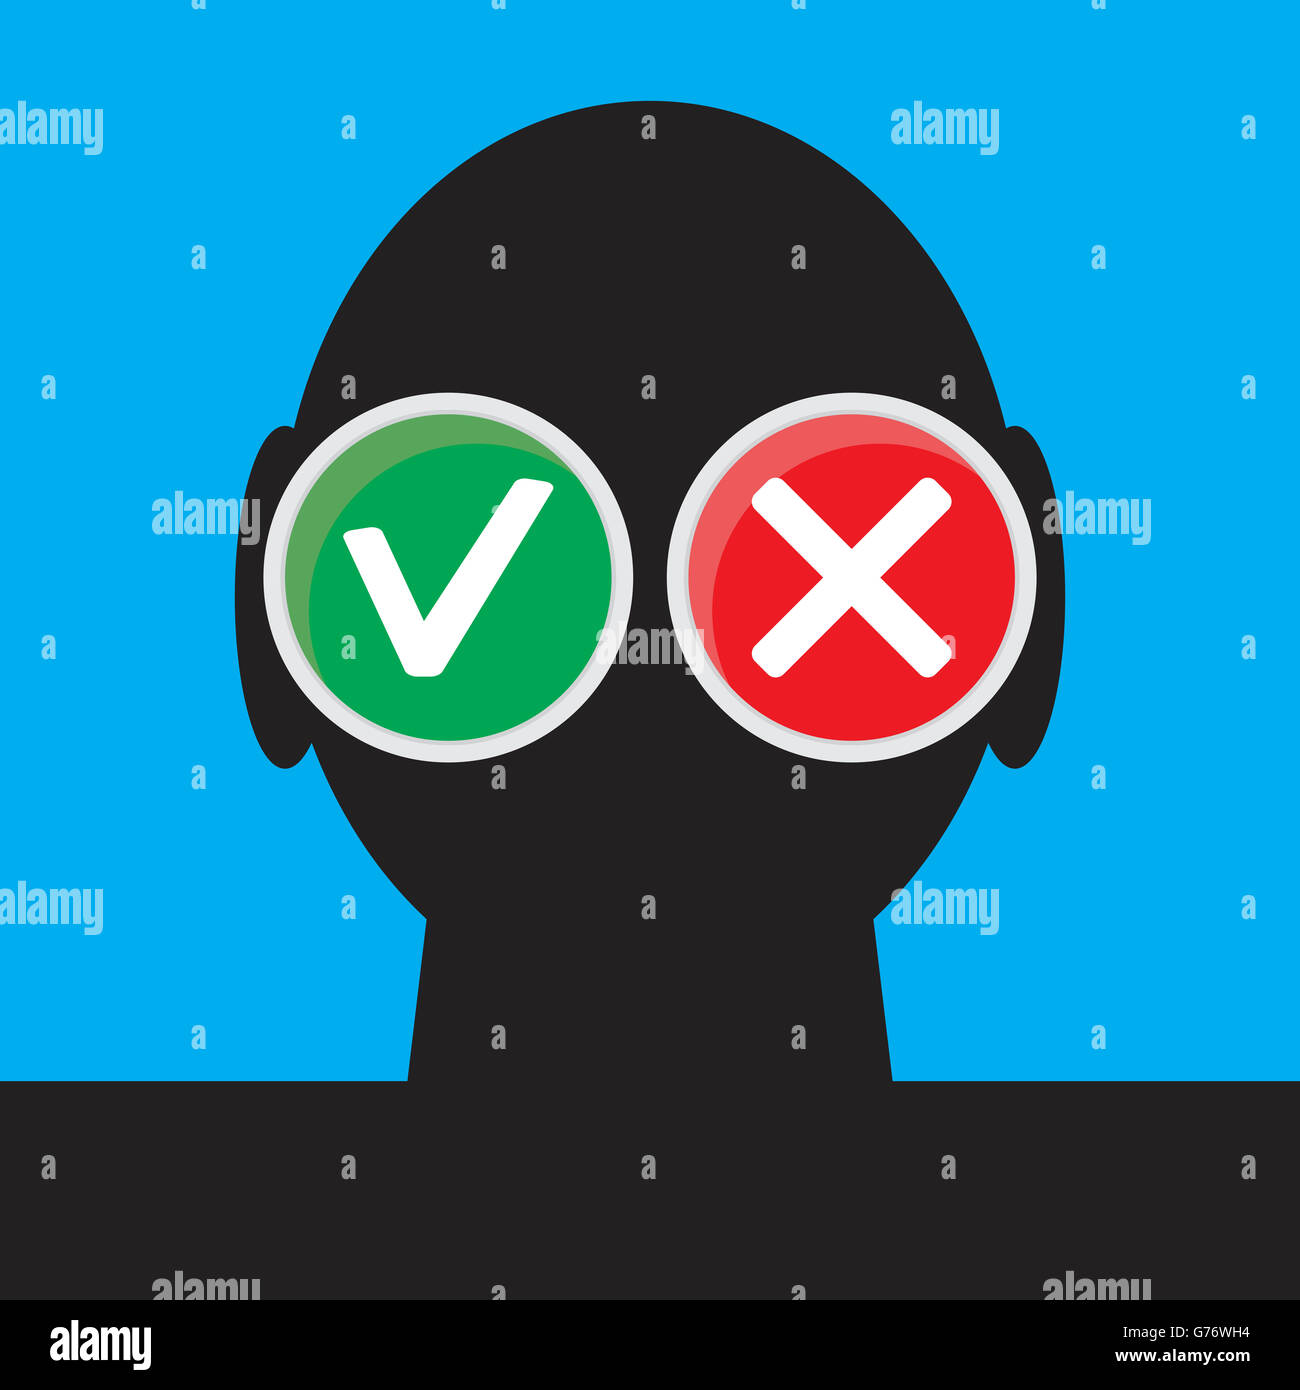 Personal choice concept. Yes and no, yes no maybe, right and wrong, do and dont, vector illustration Stock Photo